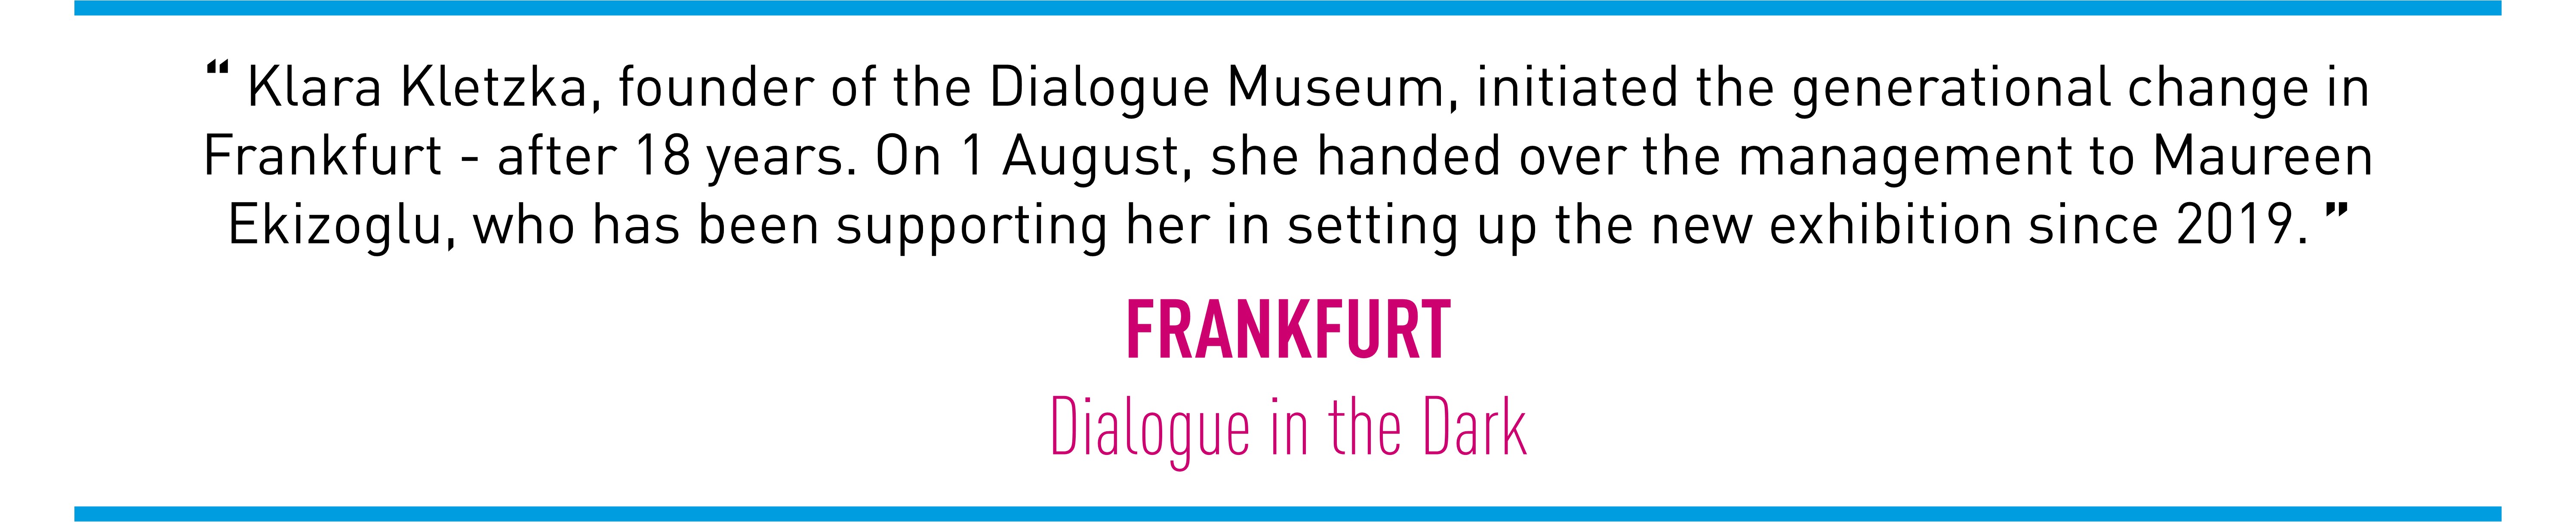 Klara Kletzka, founder of the Dialogue Museum, initiated the generational change in Frankfurt - after 18 years. On 1 August, she handed over the management to Maureen Ekizoglu, who has been supporting her in setting up the new exhibition since 2019. (FRANKFURT Dialogue in the Dark)